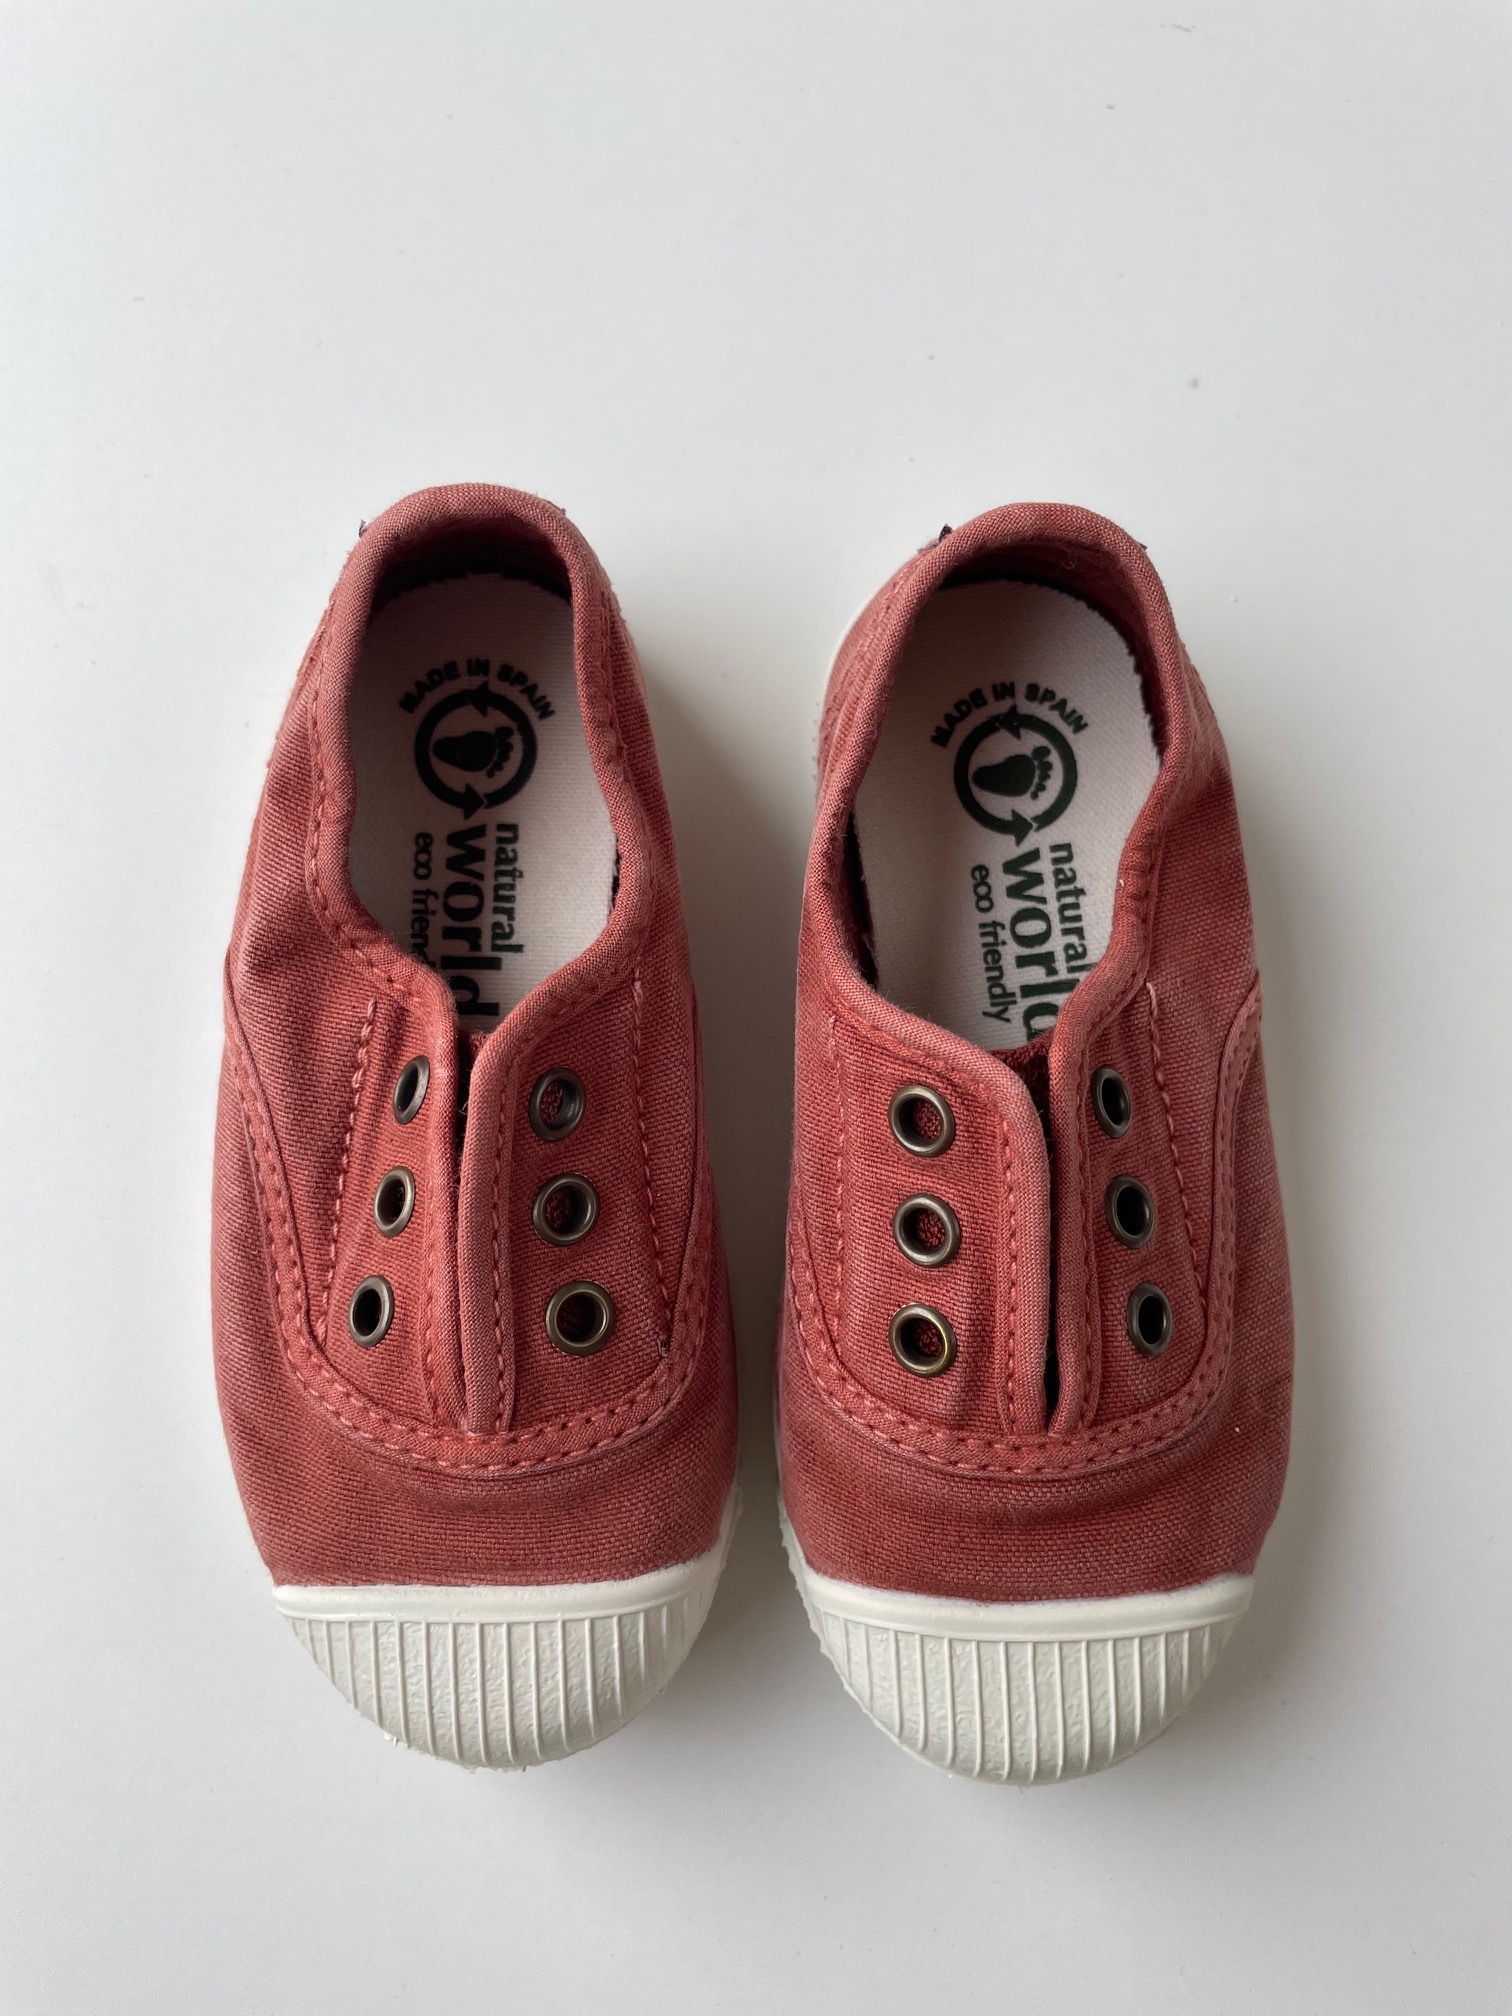 NATURAL WORLD eco kids sneakers OLD LAVANDA - organic cotton - stone washed red - 21 to 34